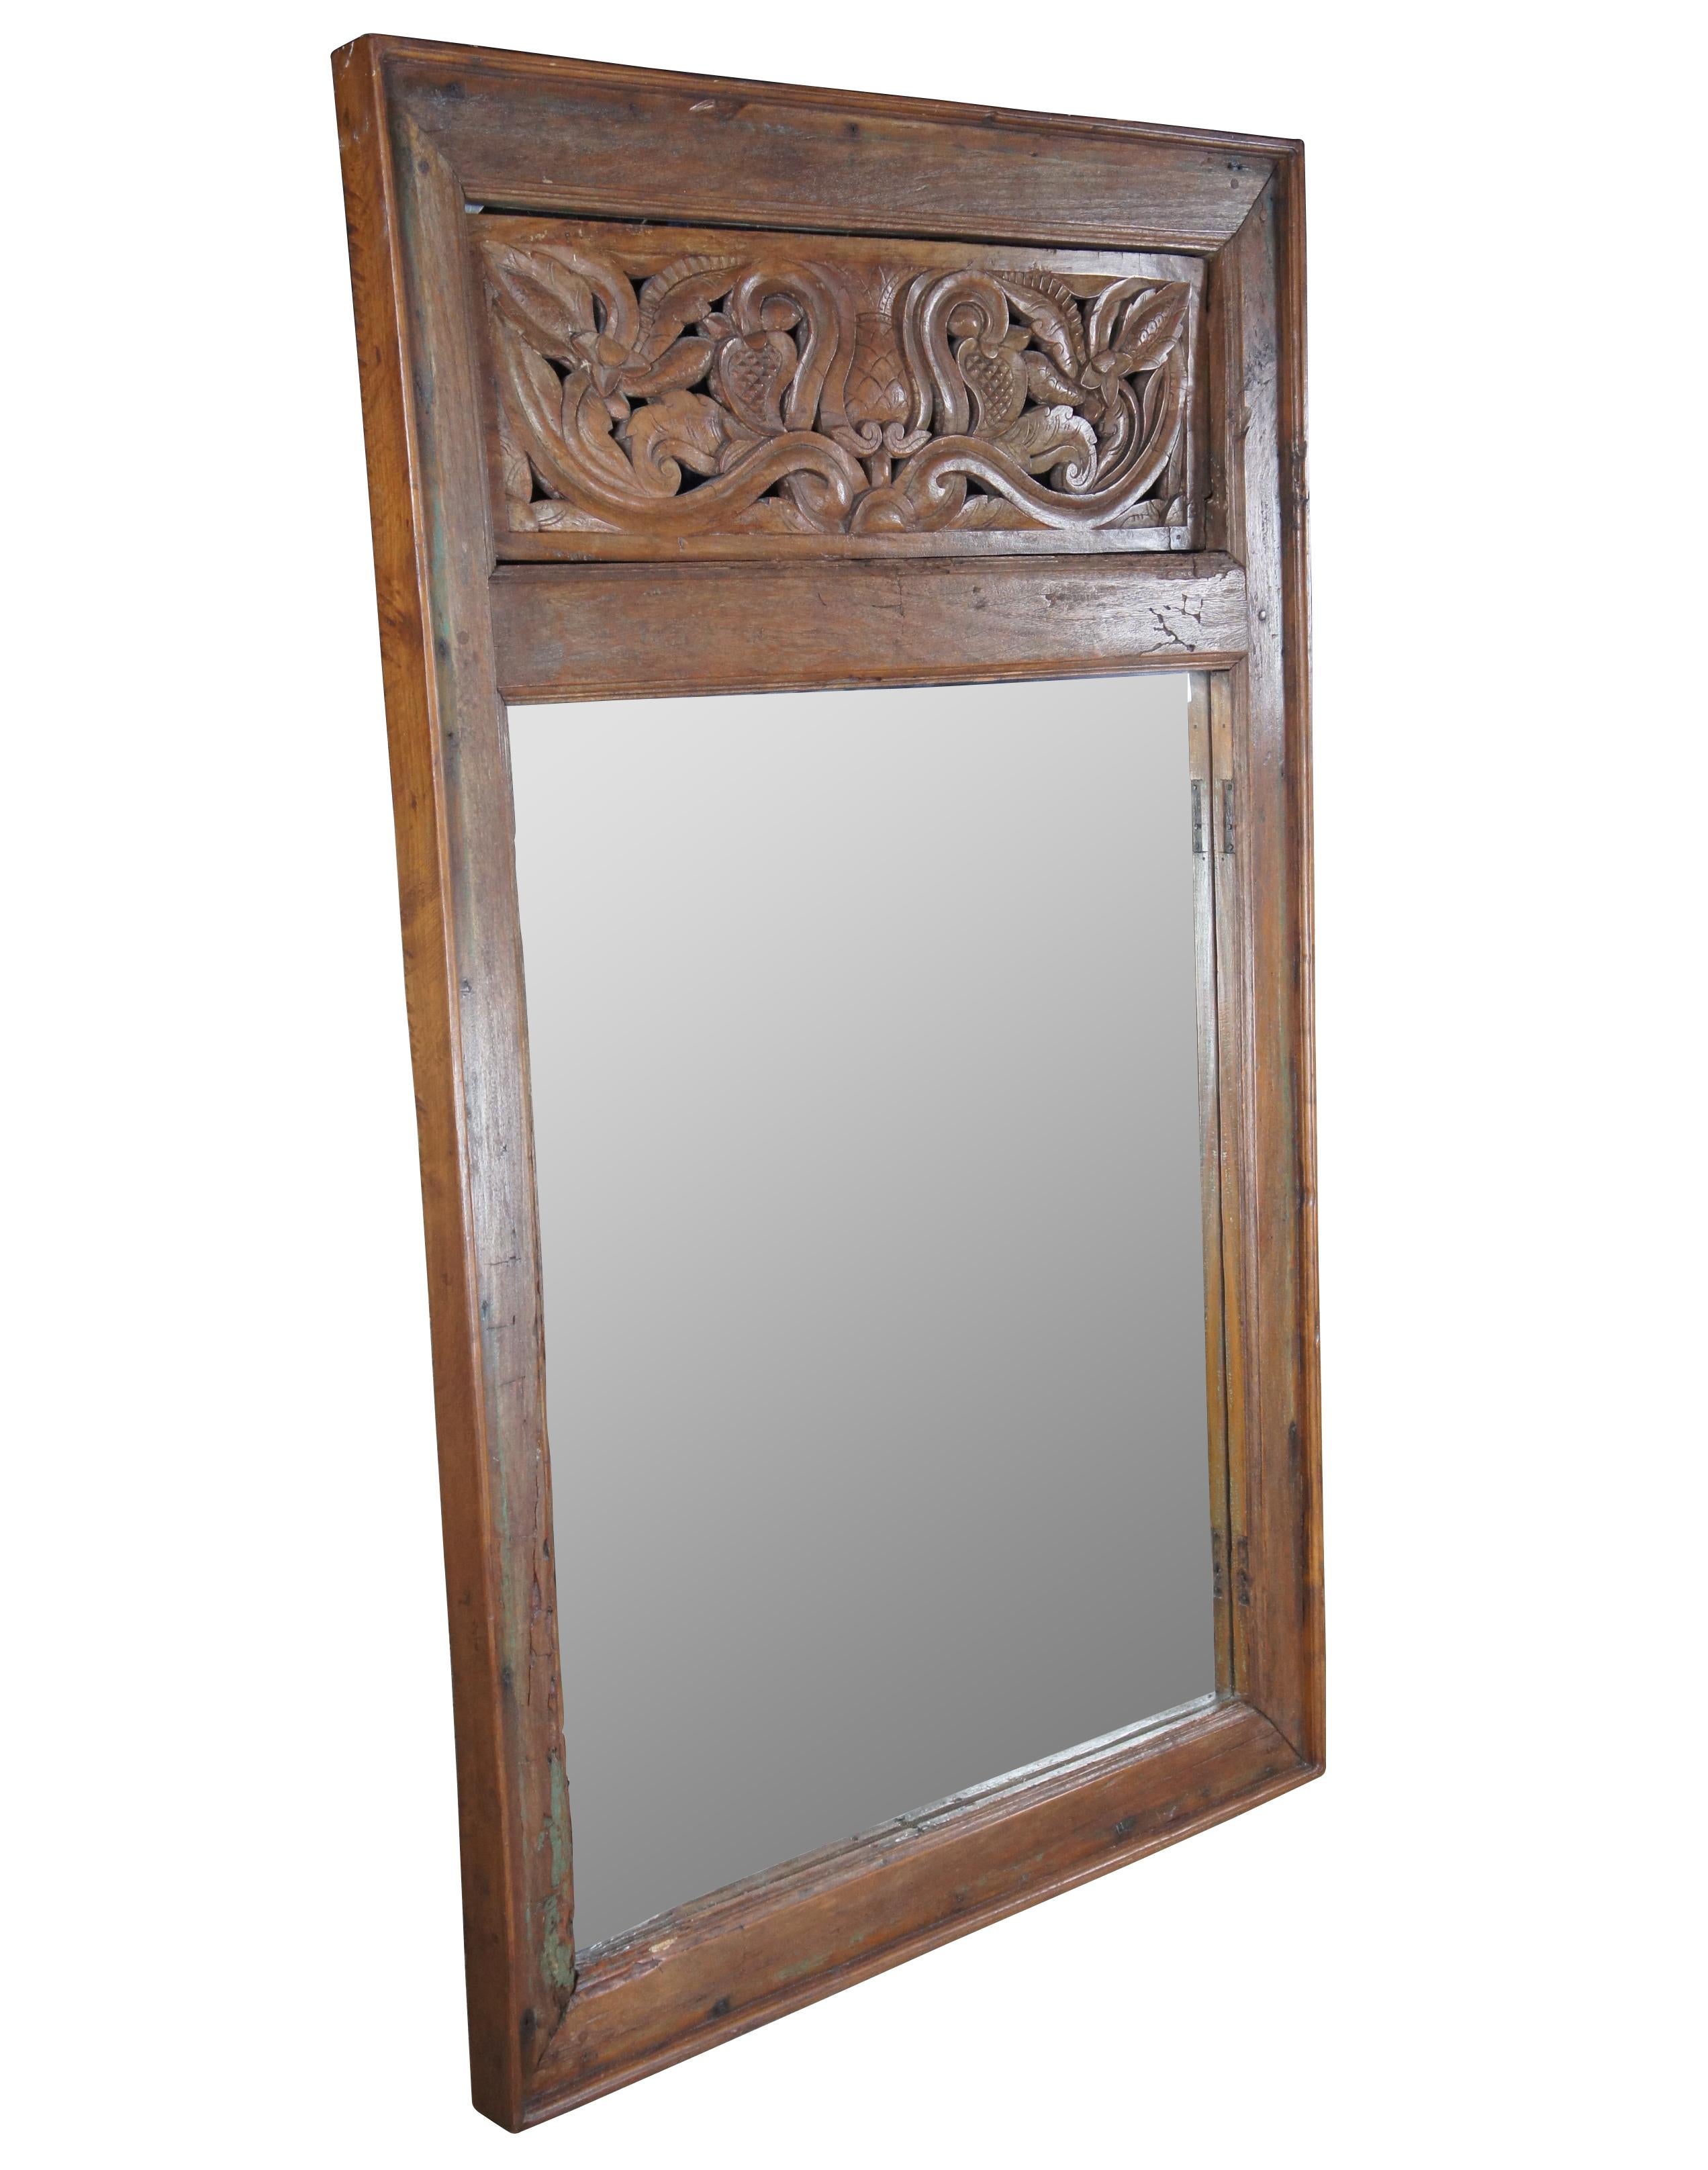 Impressive Indonesian carved mahogany over mantel or wall hanging mirror. Re-claimed or salvaged from a doorway or shutter. Original hinge marks can be seen along the inside of the trim. Features a rectangular frame with pierced foliate crown and